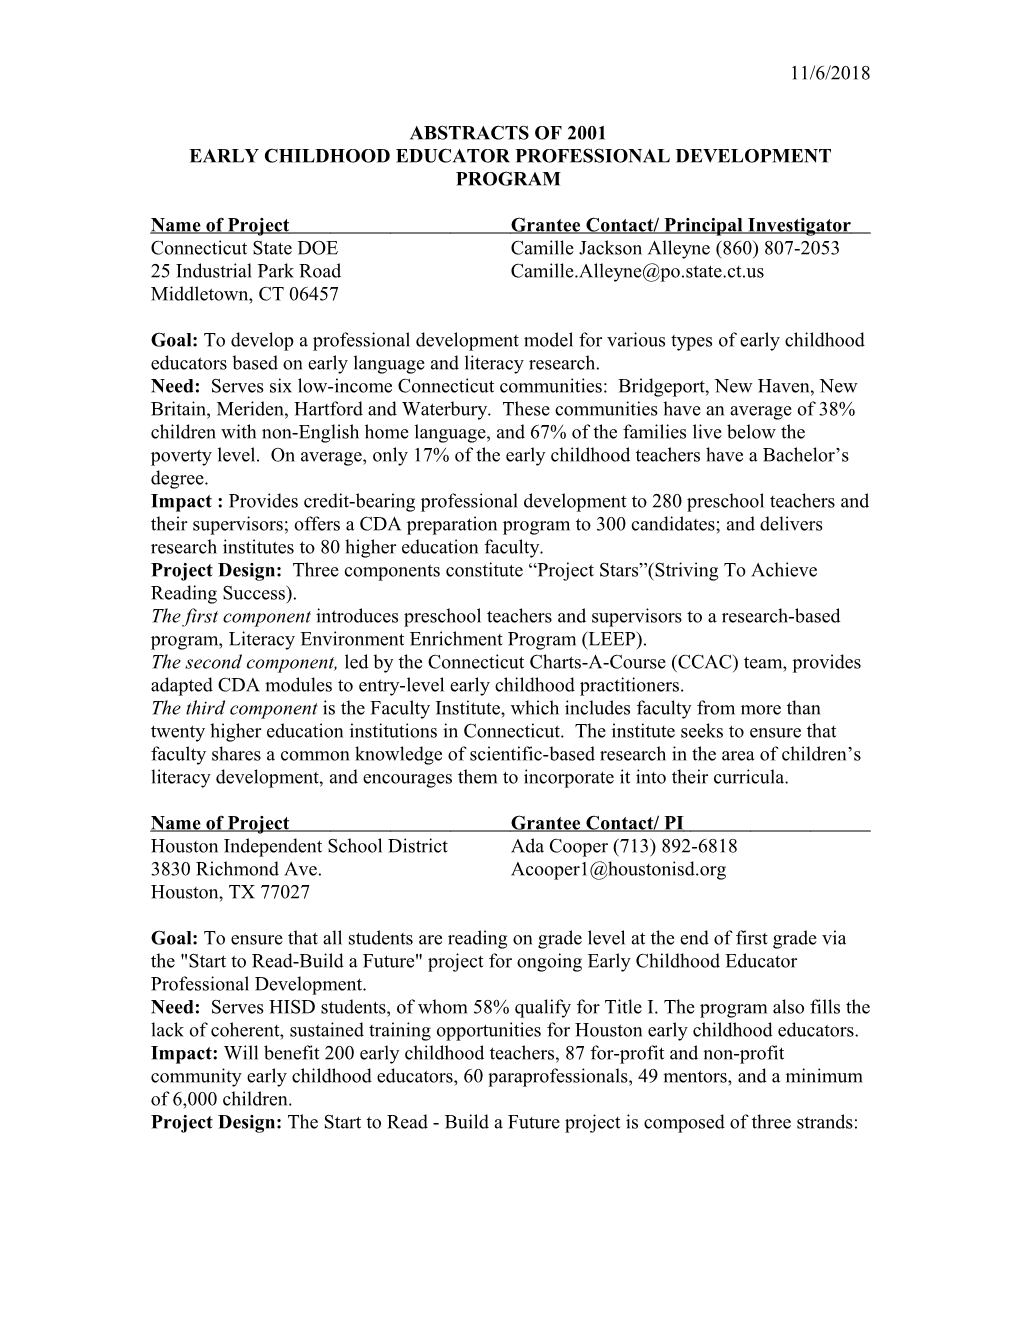 Early Childhood Educator Professional Development Program FY 2001 Abstracts (MS WORD)